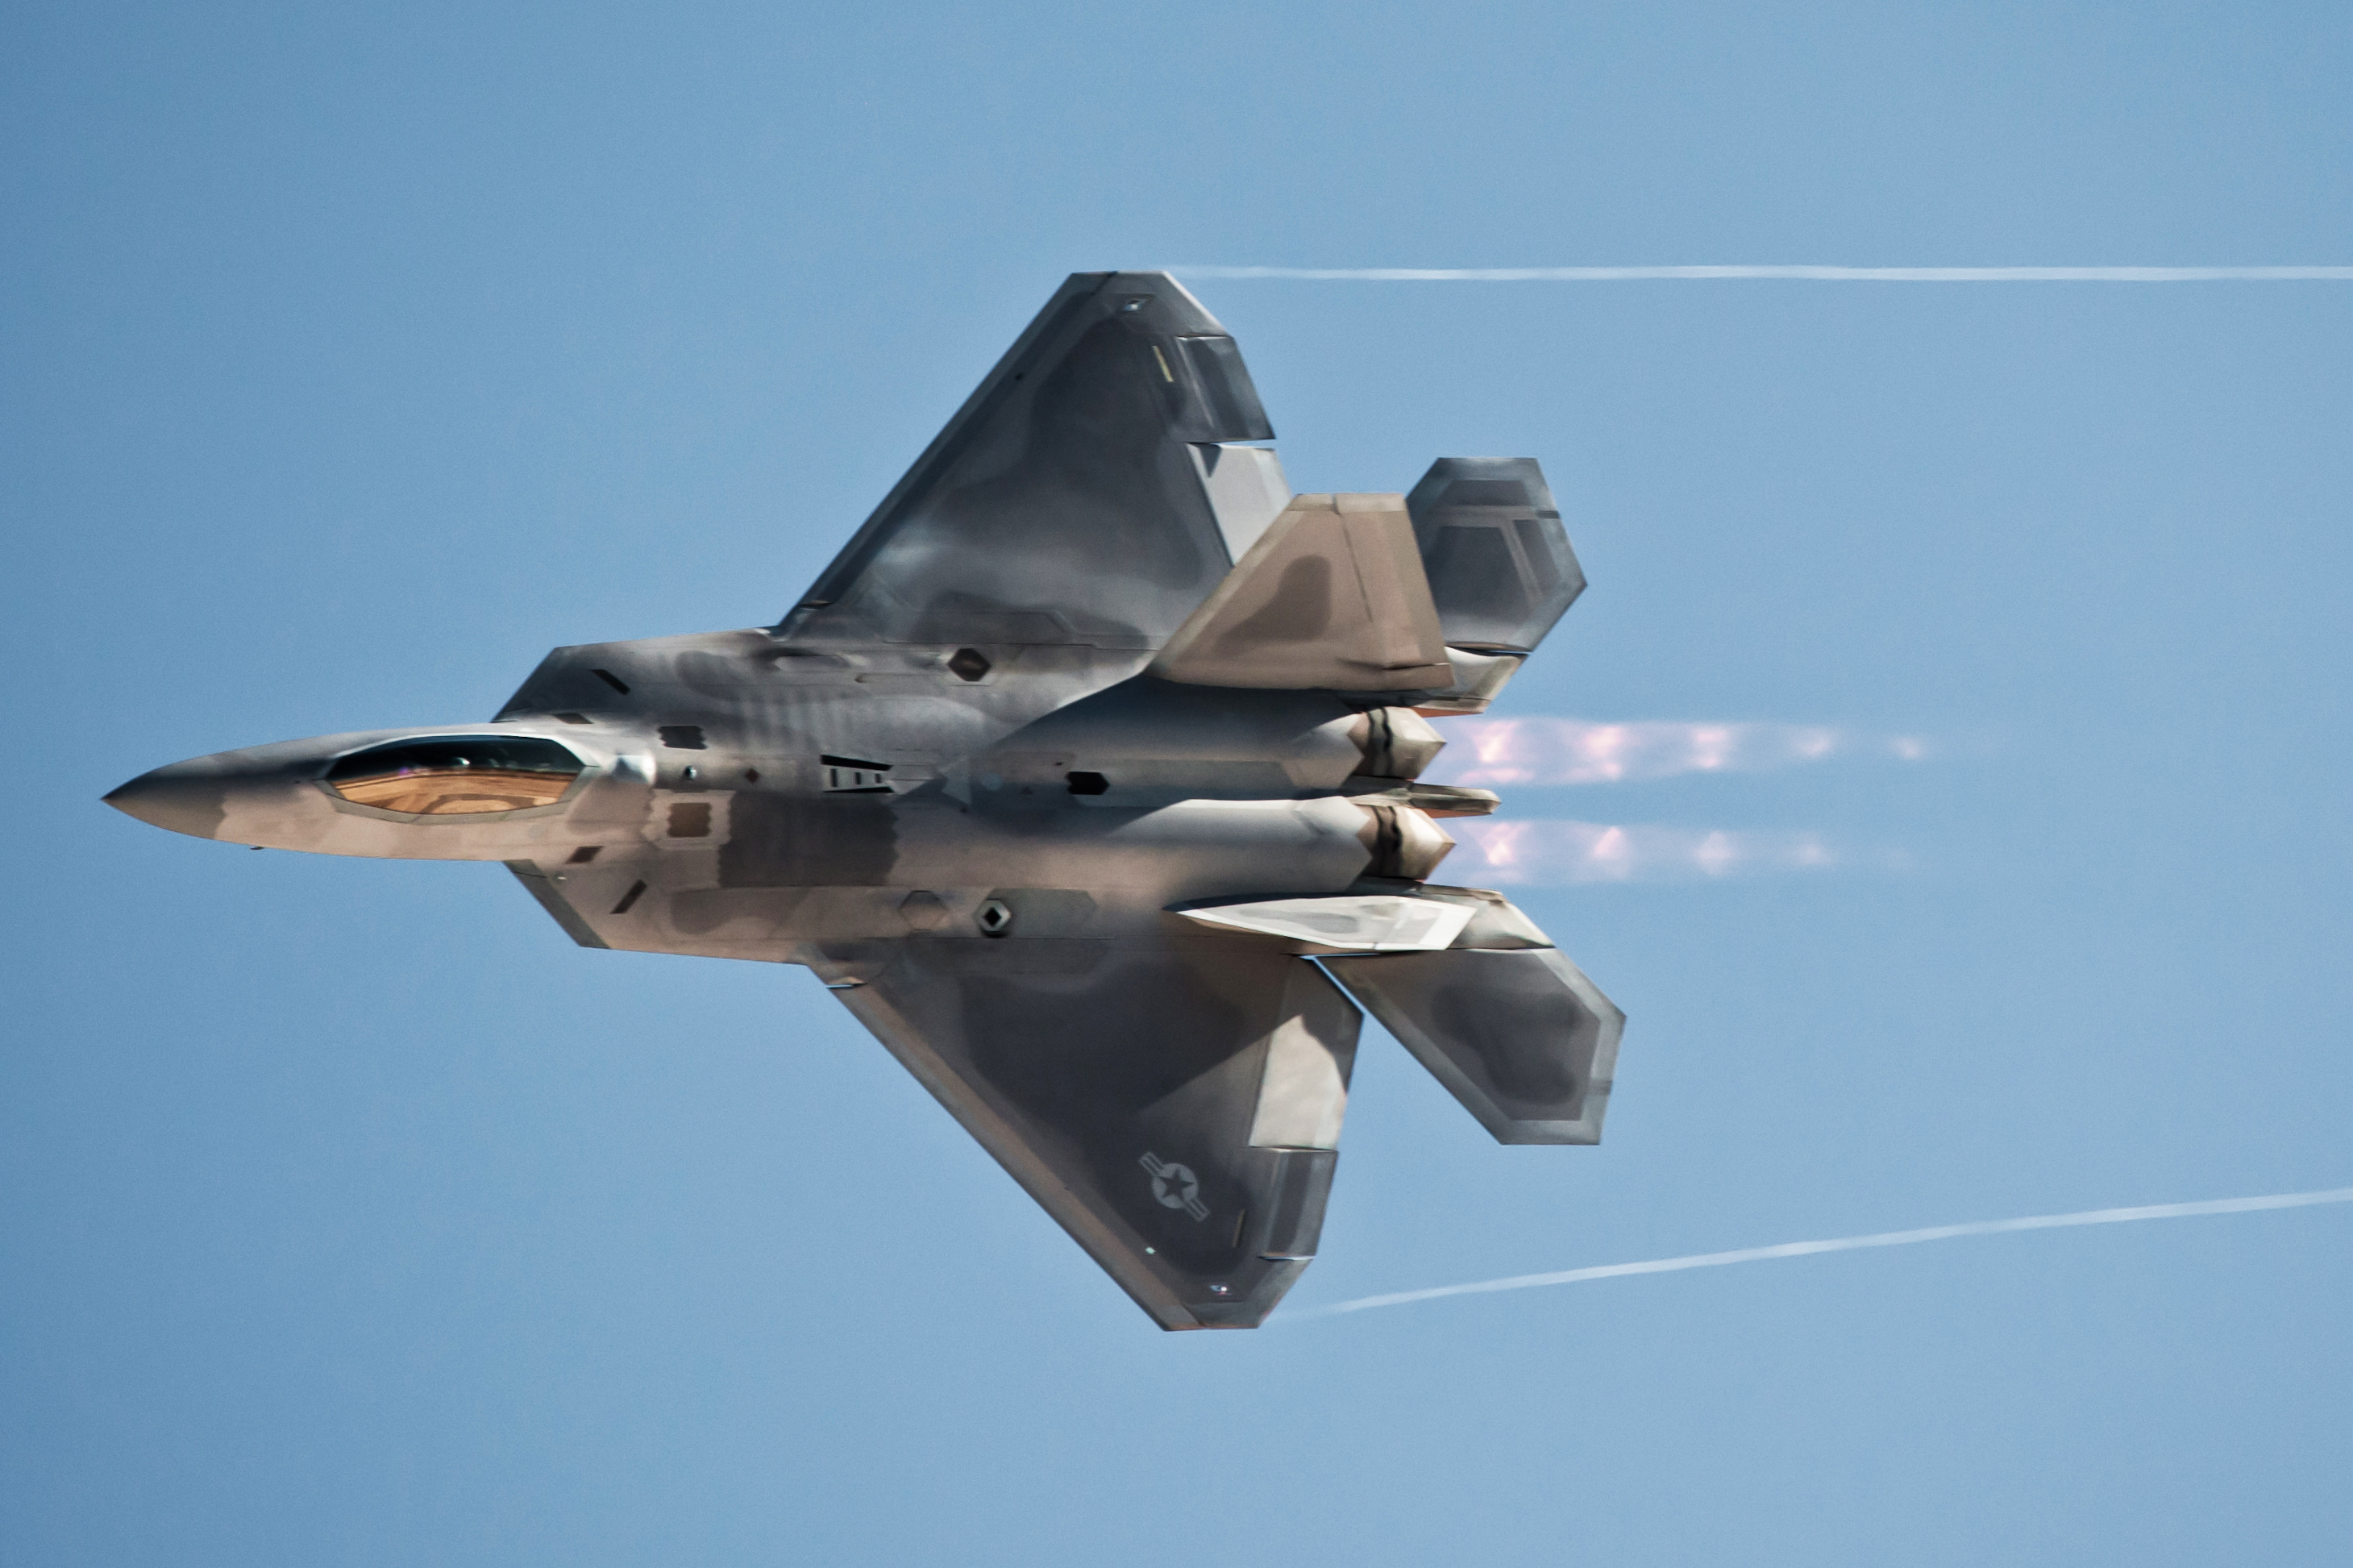 The Lockheed Martin/Boeing F-22 Raptor is a single-seat, twin-engine fifth-generation